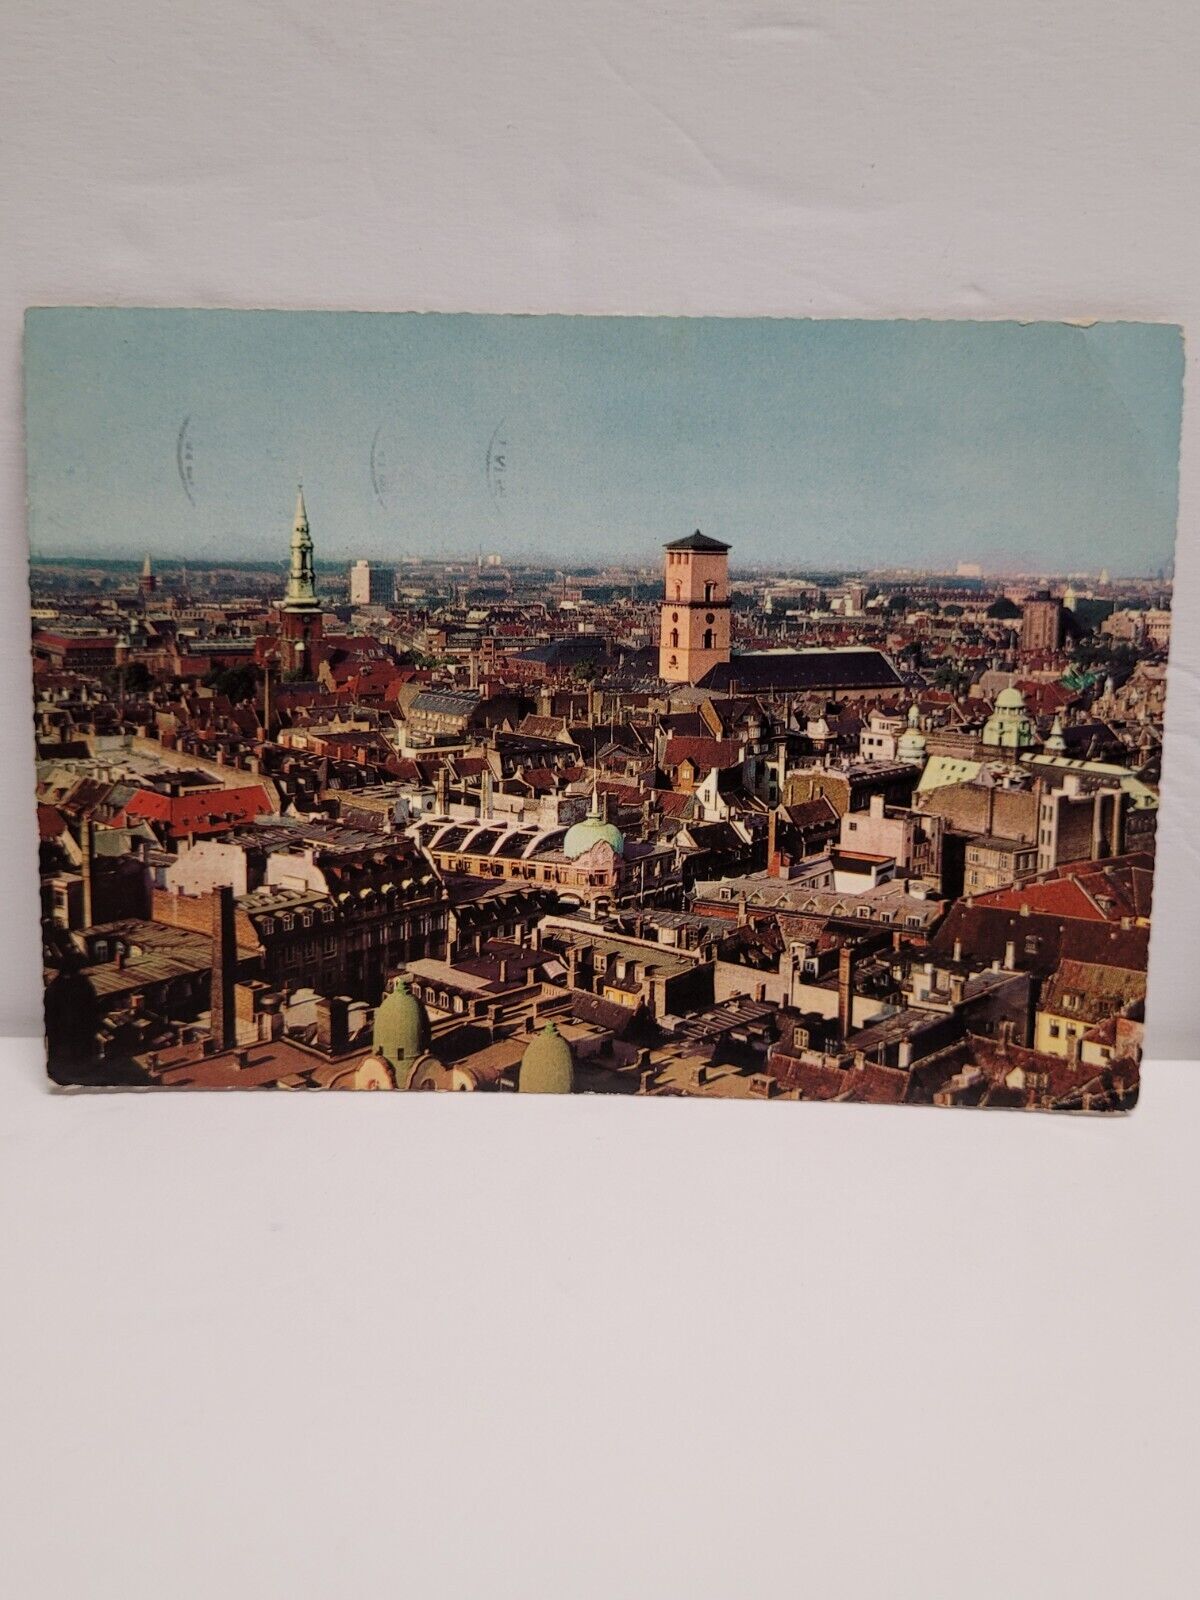 Vintage Used Postcard 1963 Aerial View Of Copenhagen With The Church Of Our Lady